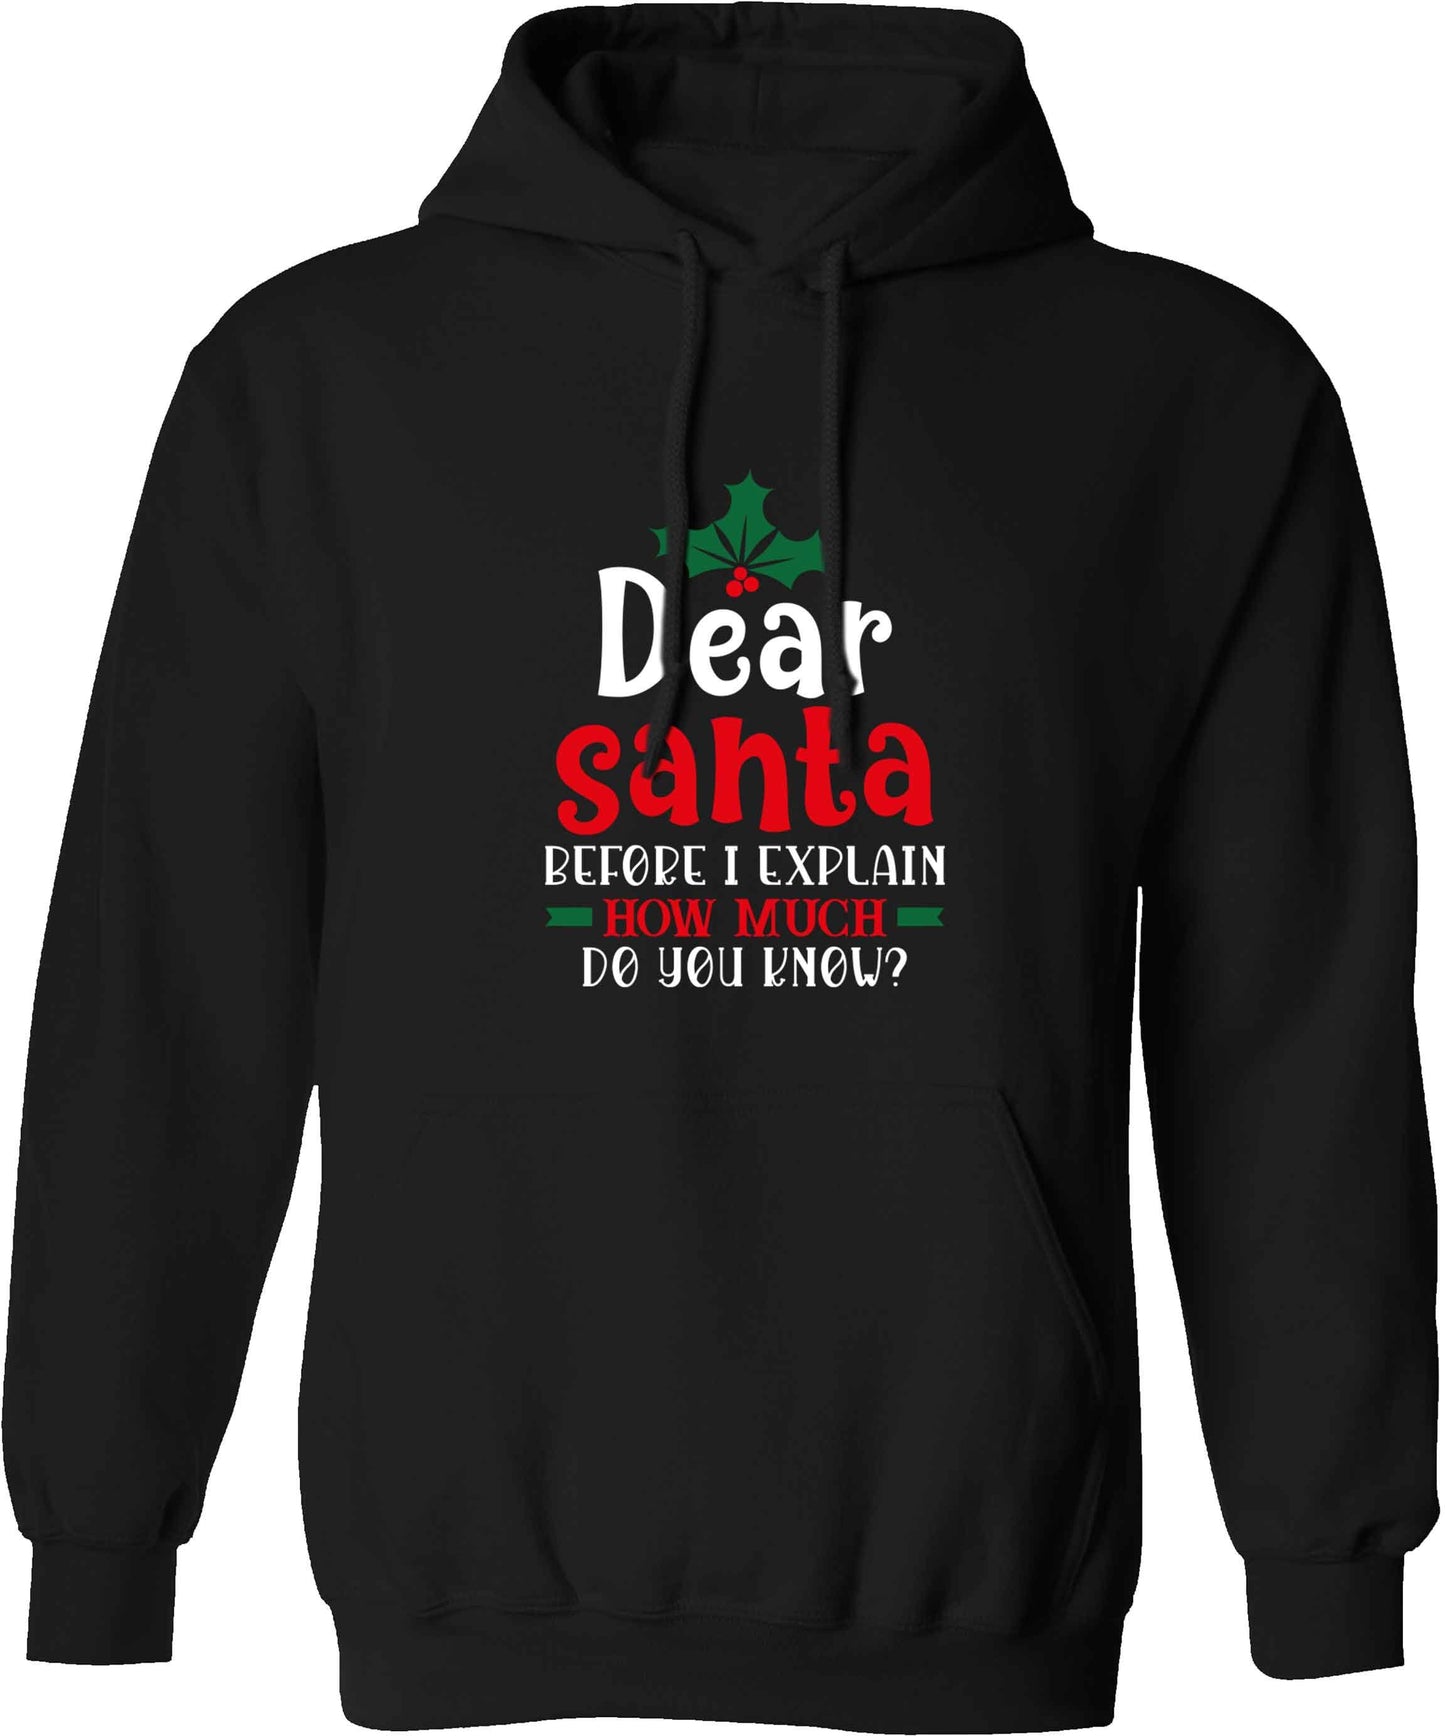 Santa before I explain how much do you know? adults unisex black hoodie 2XL